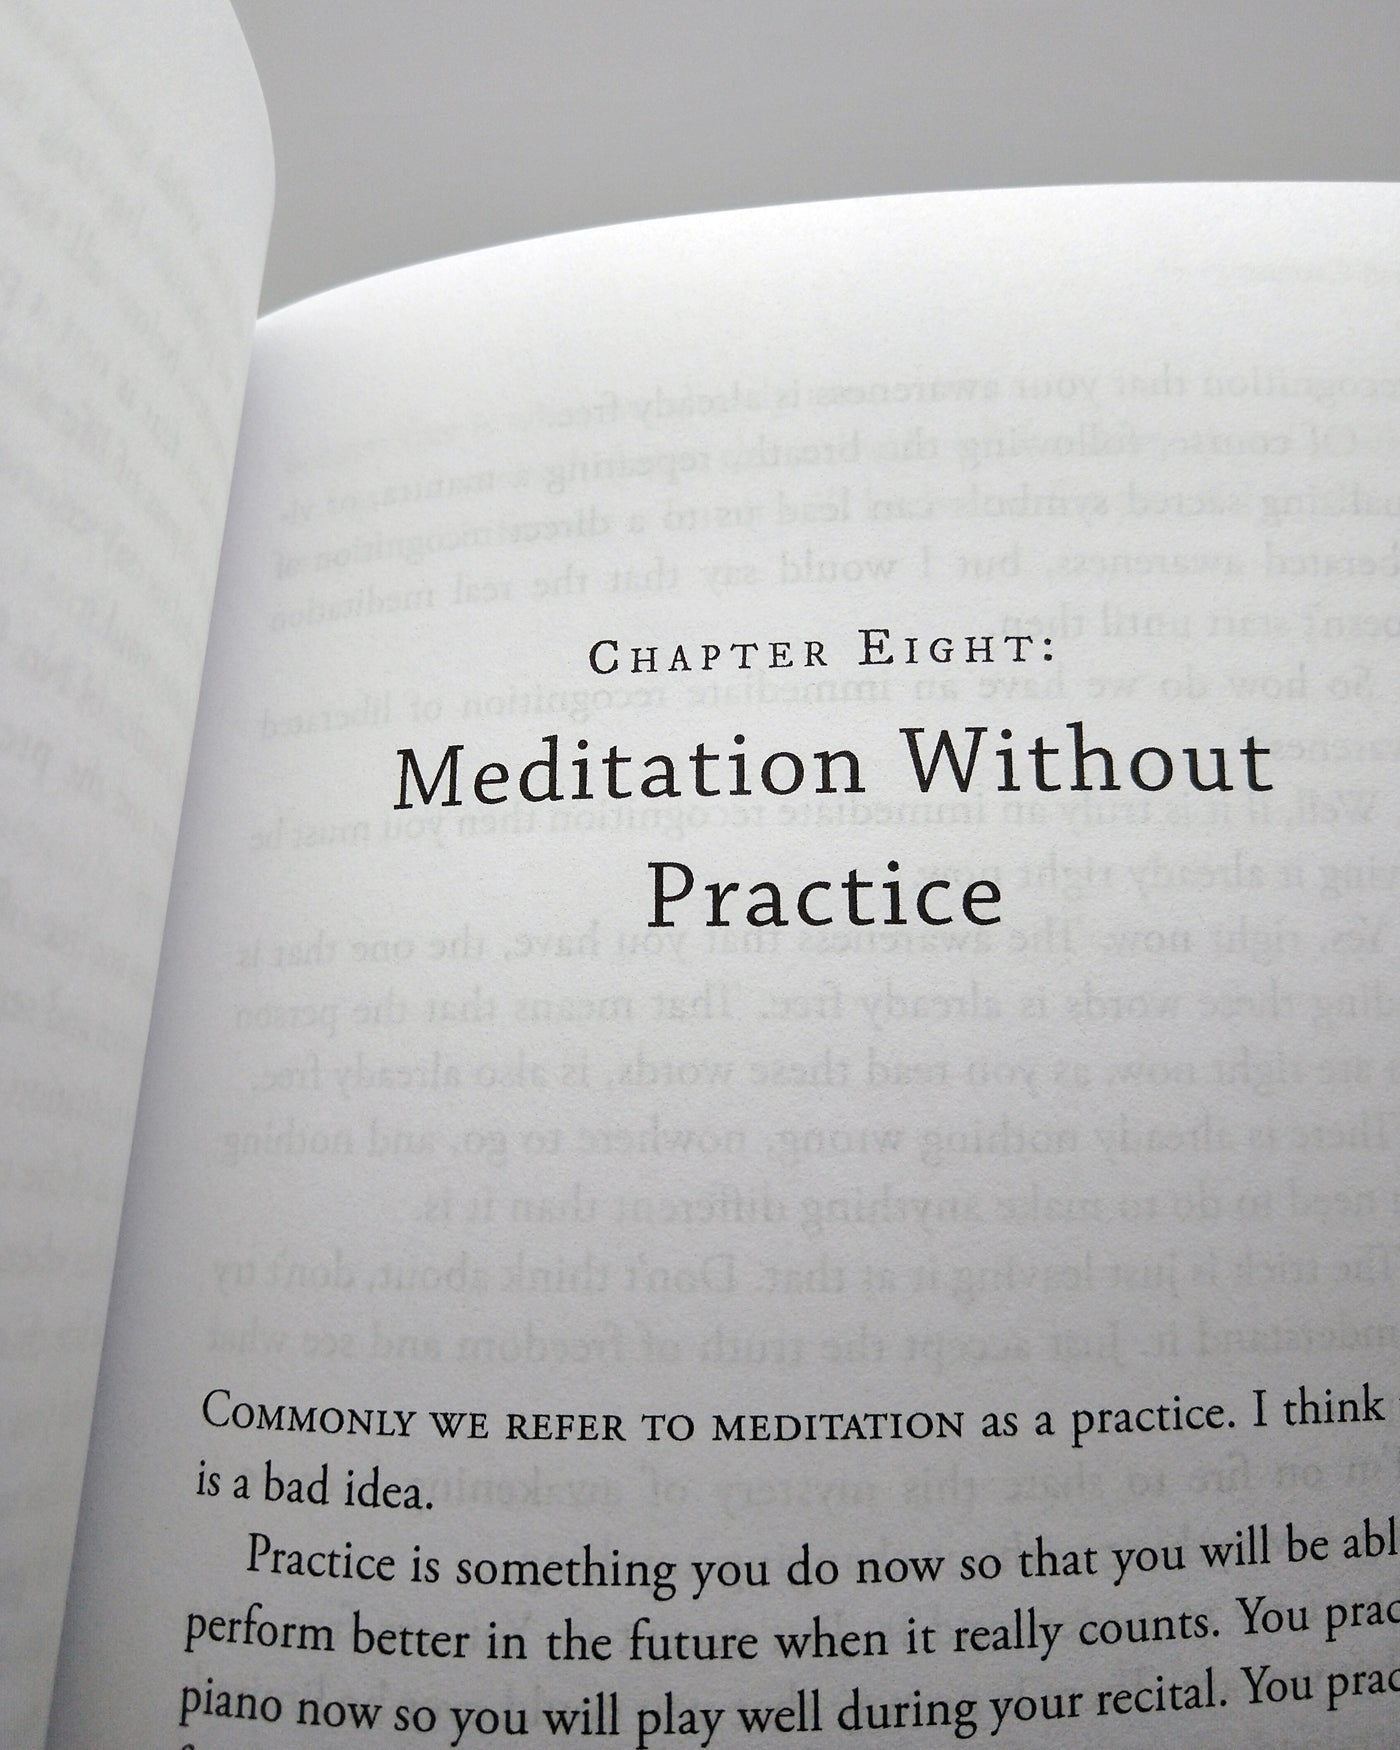 No Place But Home: Reflections on Meditation and the Spiritual Life